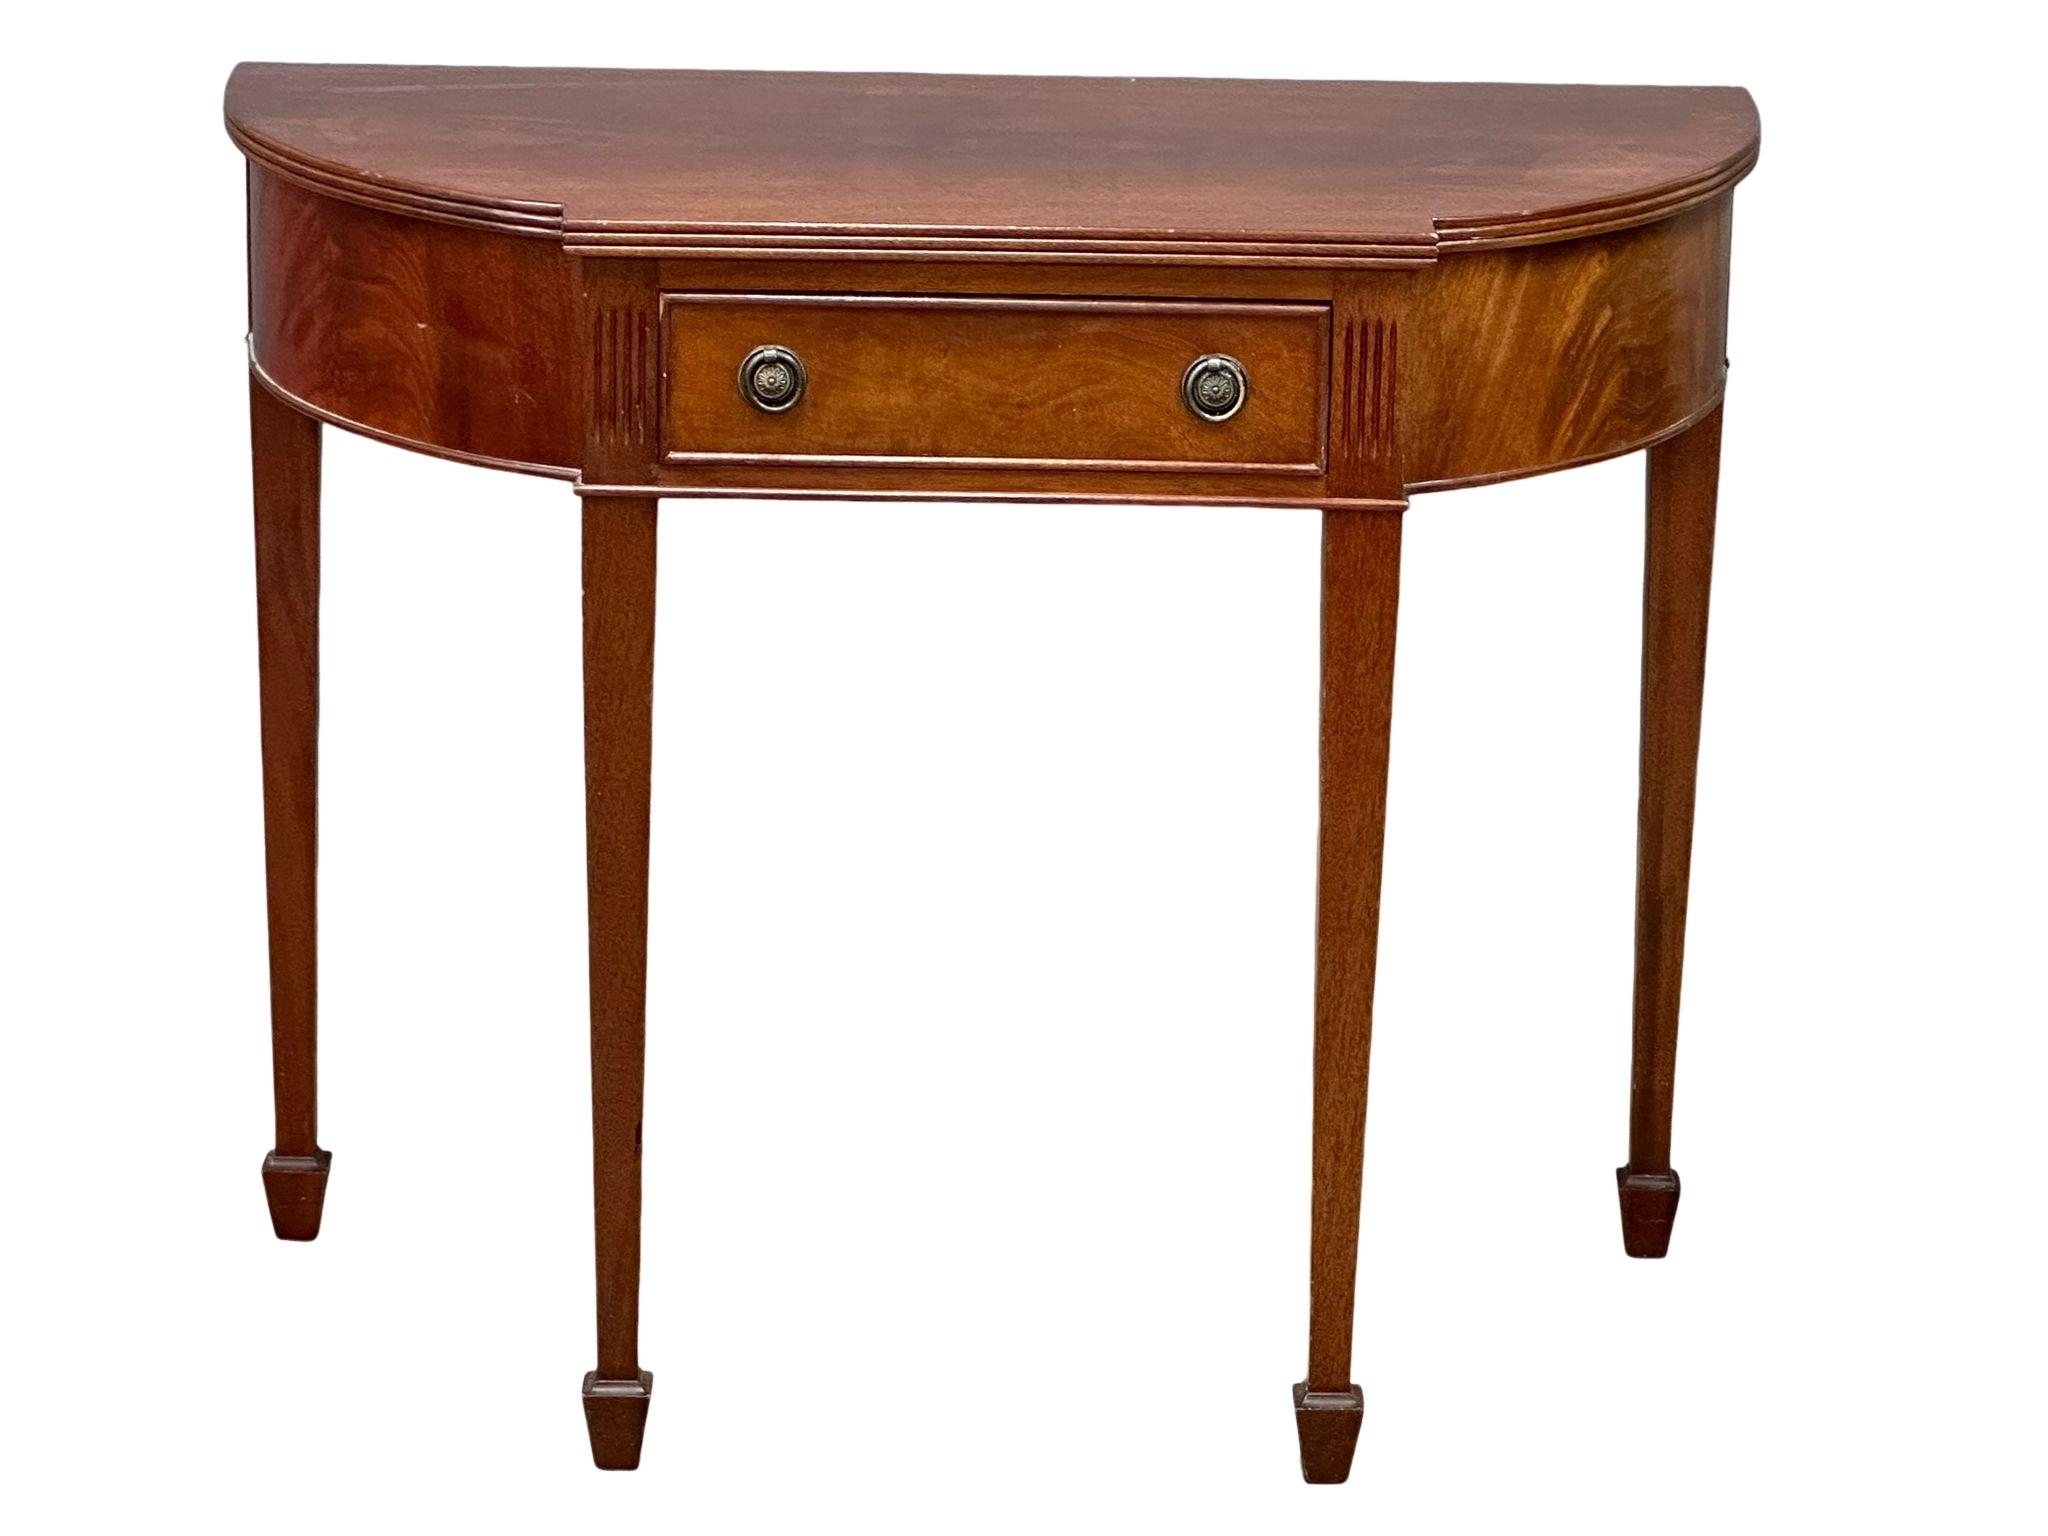 A Hepplewhite style mahogany serpentine front side table with drawer. 95.5x47.5x77cm